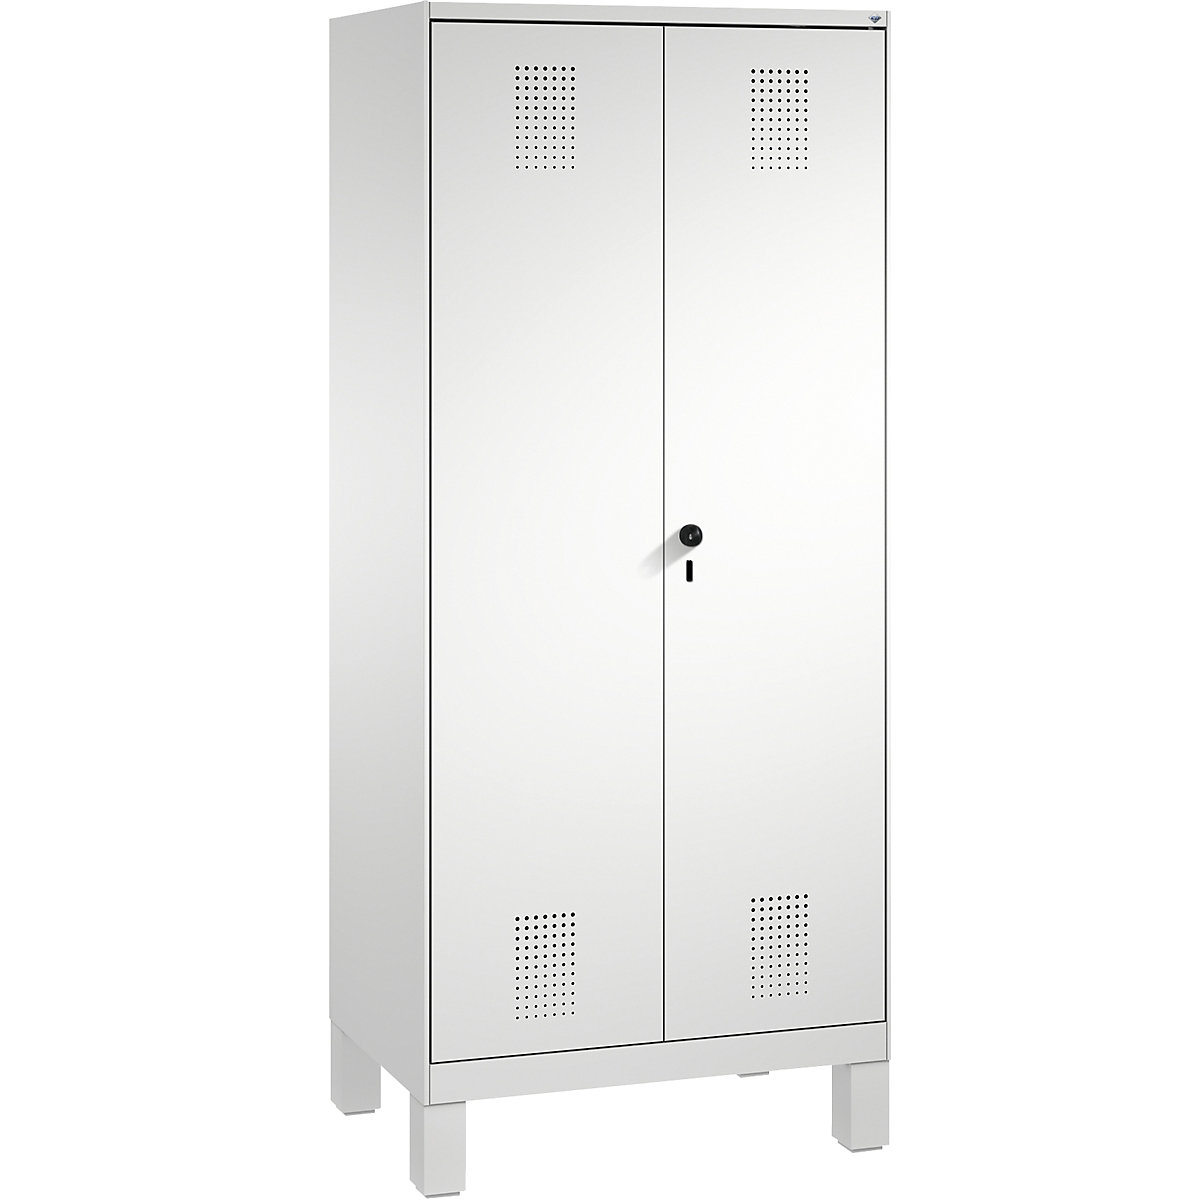 EVOLO storage cupboard, doors close in the middle, with feet – C+P, 2 compartments, 8 shelves, compartment width 400 mm, light grey-8